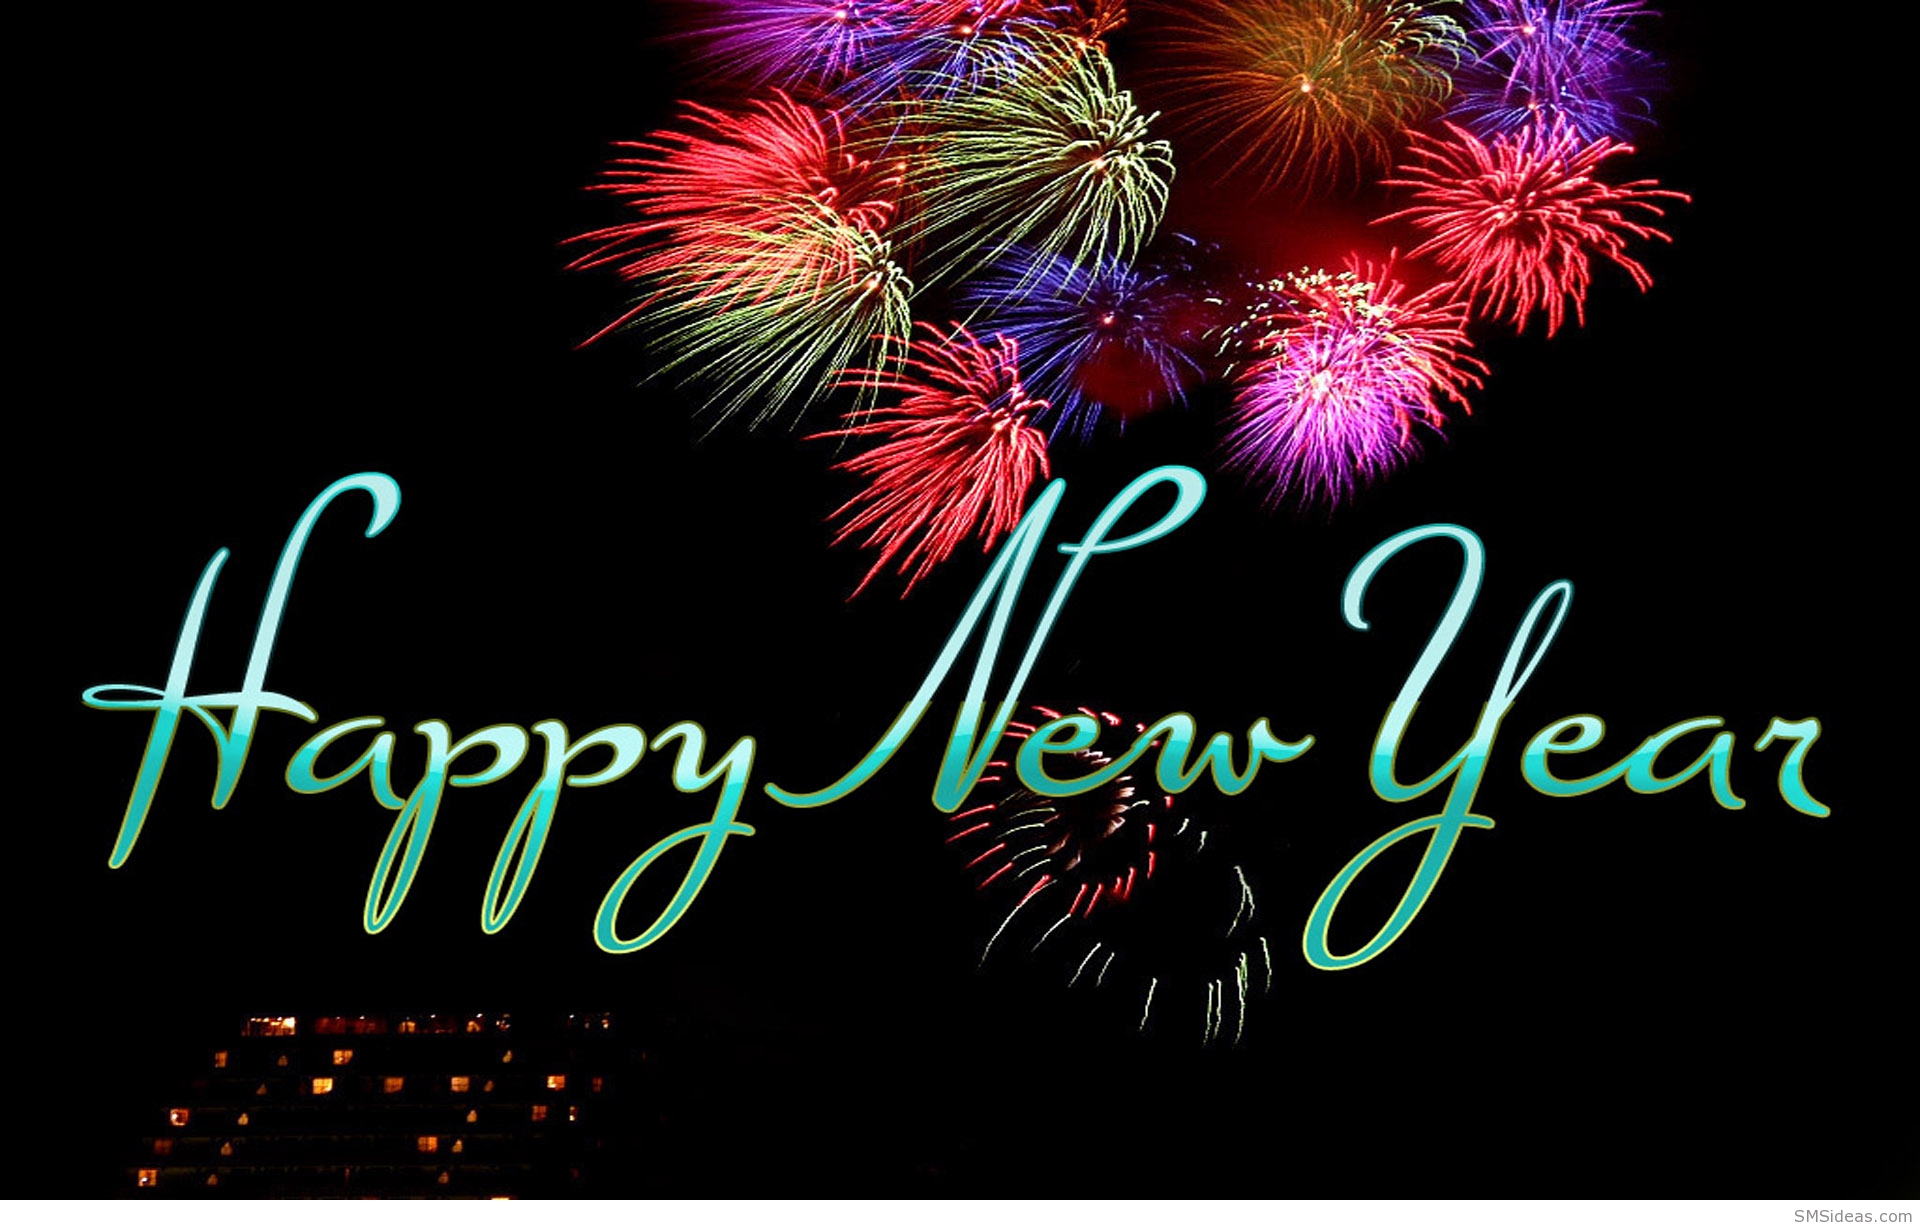 Advance Happy New Year 2022 SMS Whatsapp Status DP Quotes Msg Wishes Image